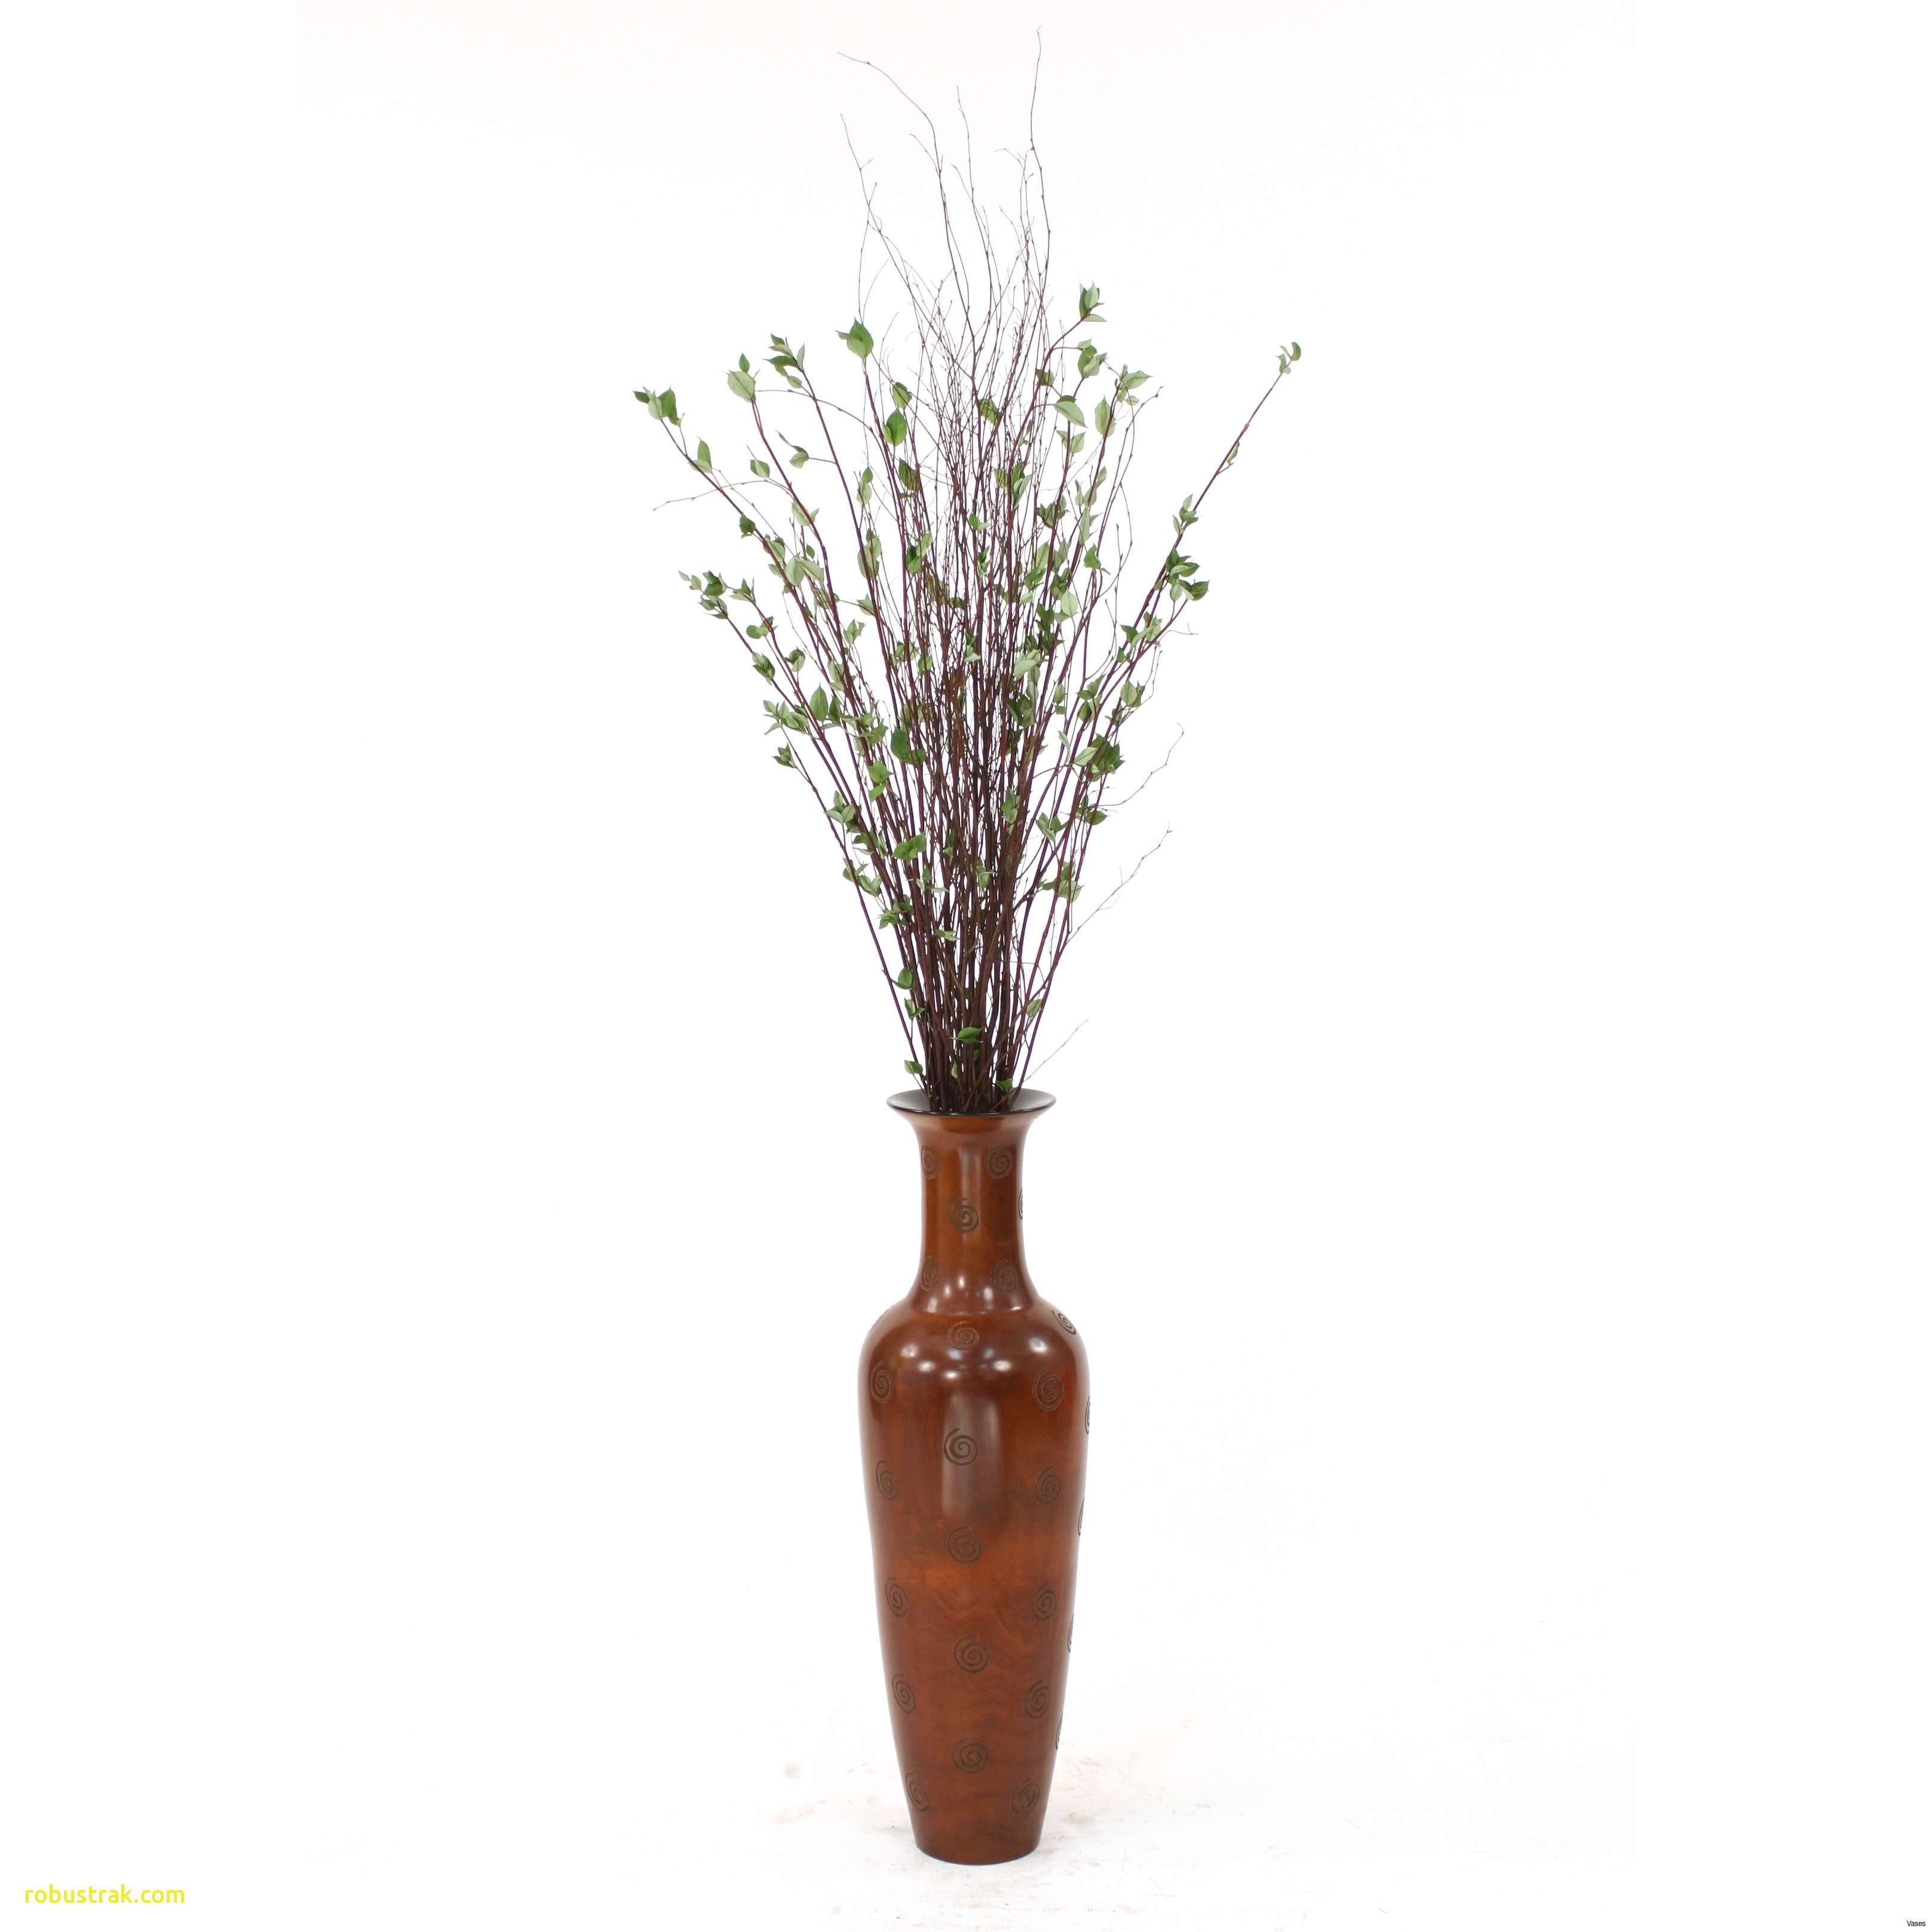 26 Wonderful Red Bamboo Floor Vase 2024 free download red bamboo floor vase of 18 new bamboo floors pics dizpos com within bamboo floors fresh decor sticks in a vase lovely vases decorative sticks in vase red images